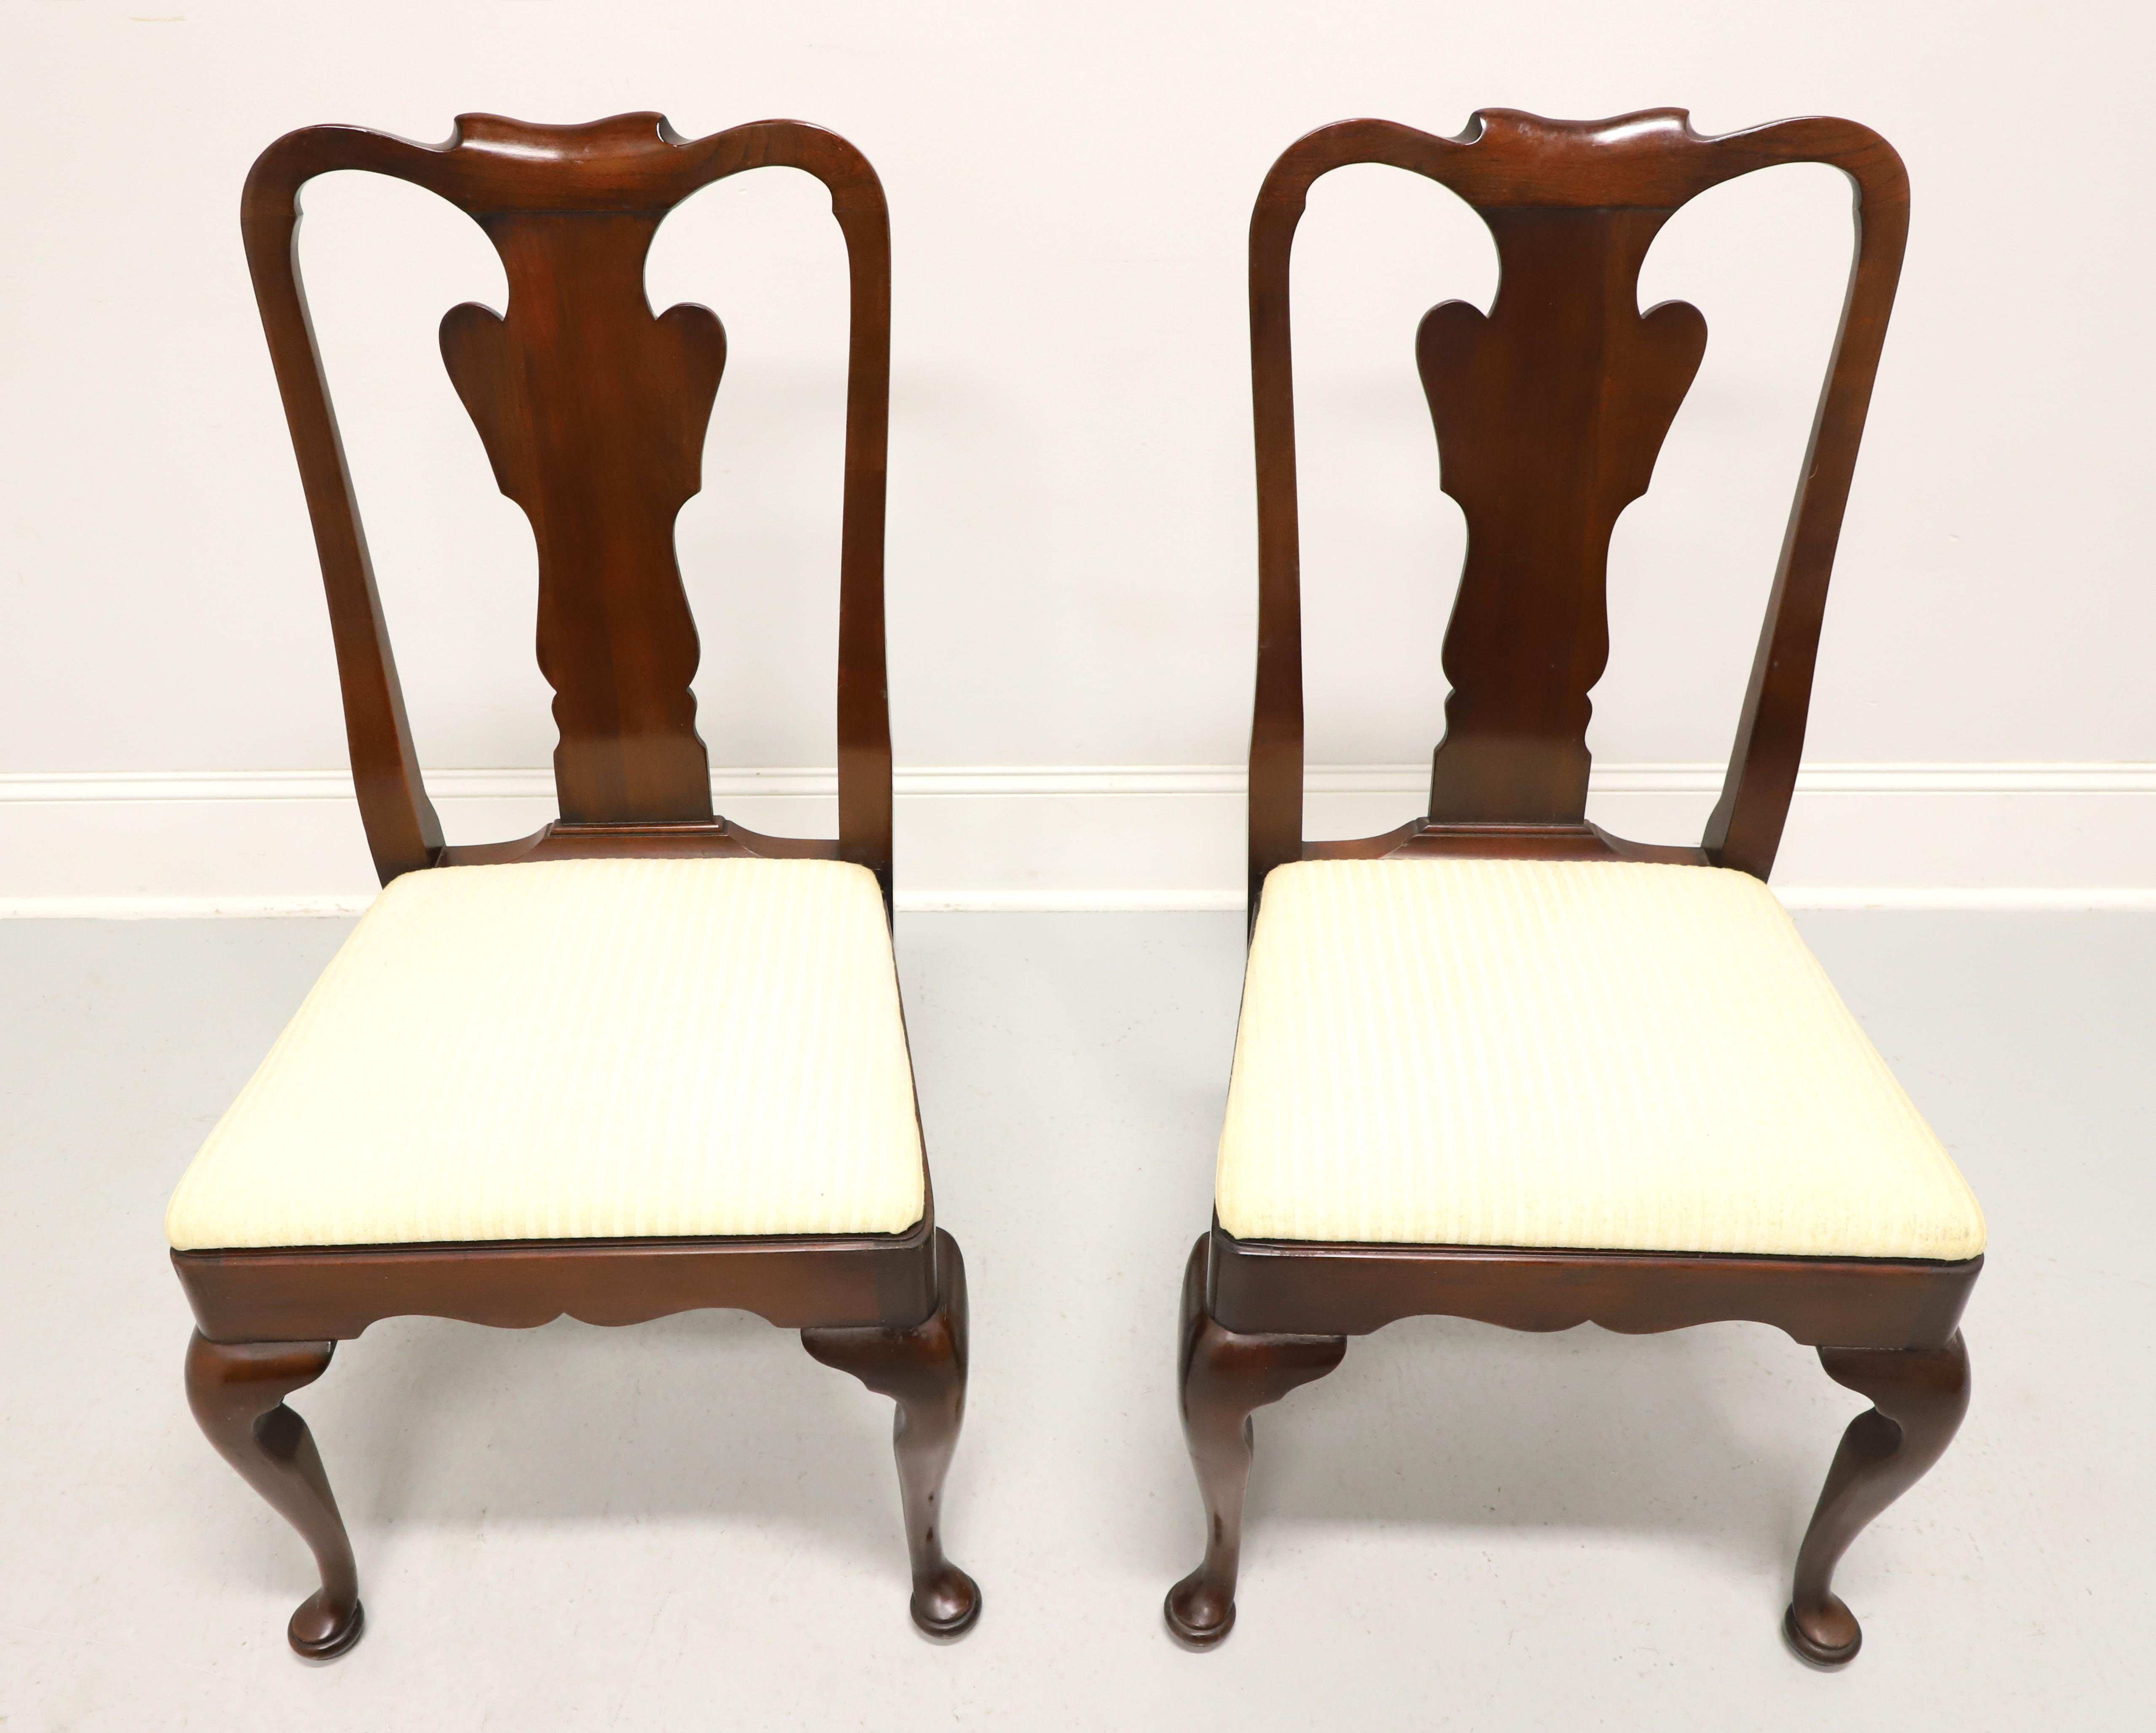 A pair of Queen Anne style dining side chairs by Statton Furniture. Solid cherry wood with their Old Towne finish, rounded crest rail, carved backrest & apron, neutral cream color textured fabric upholstered seat, cabriole legs, and pad feet. Made